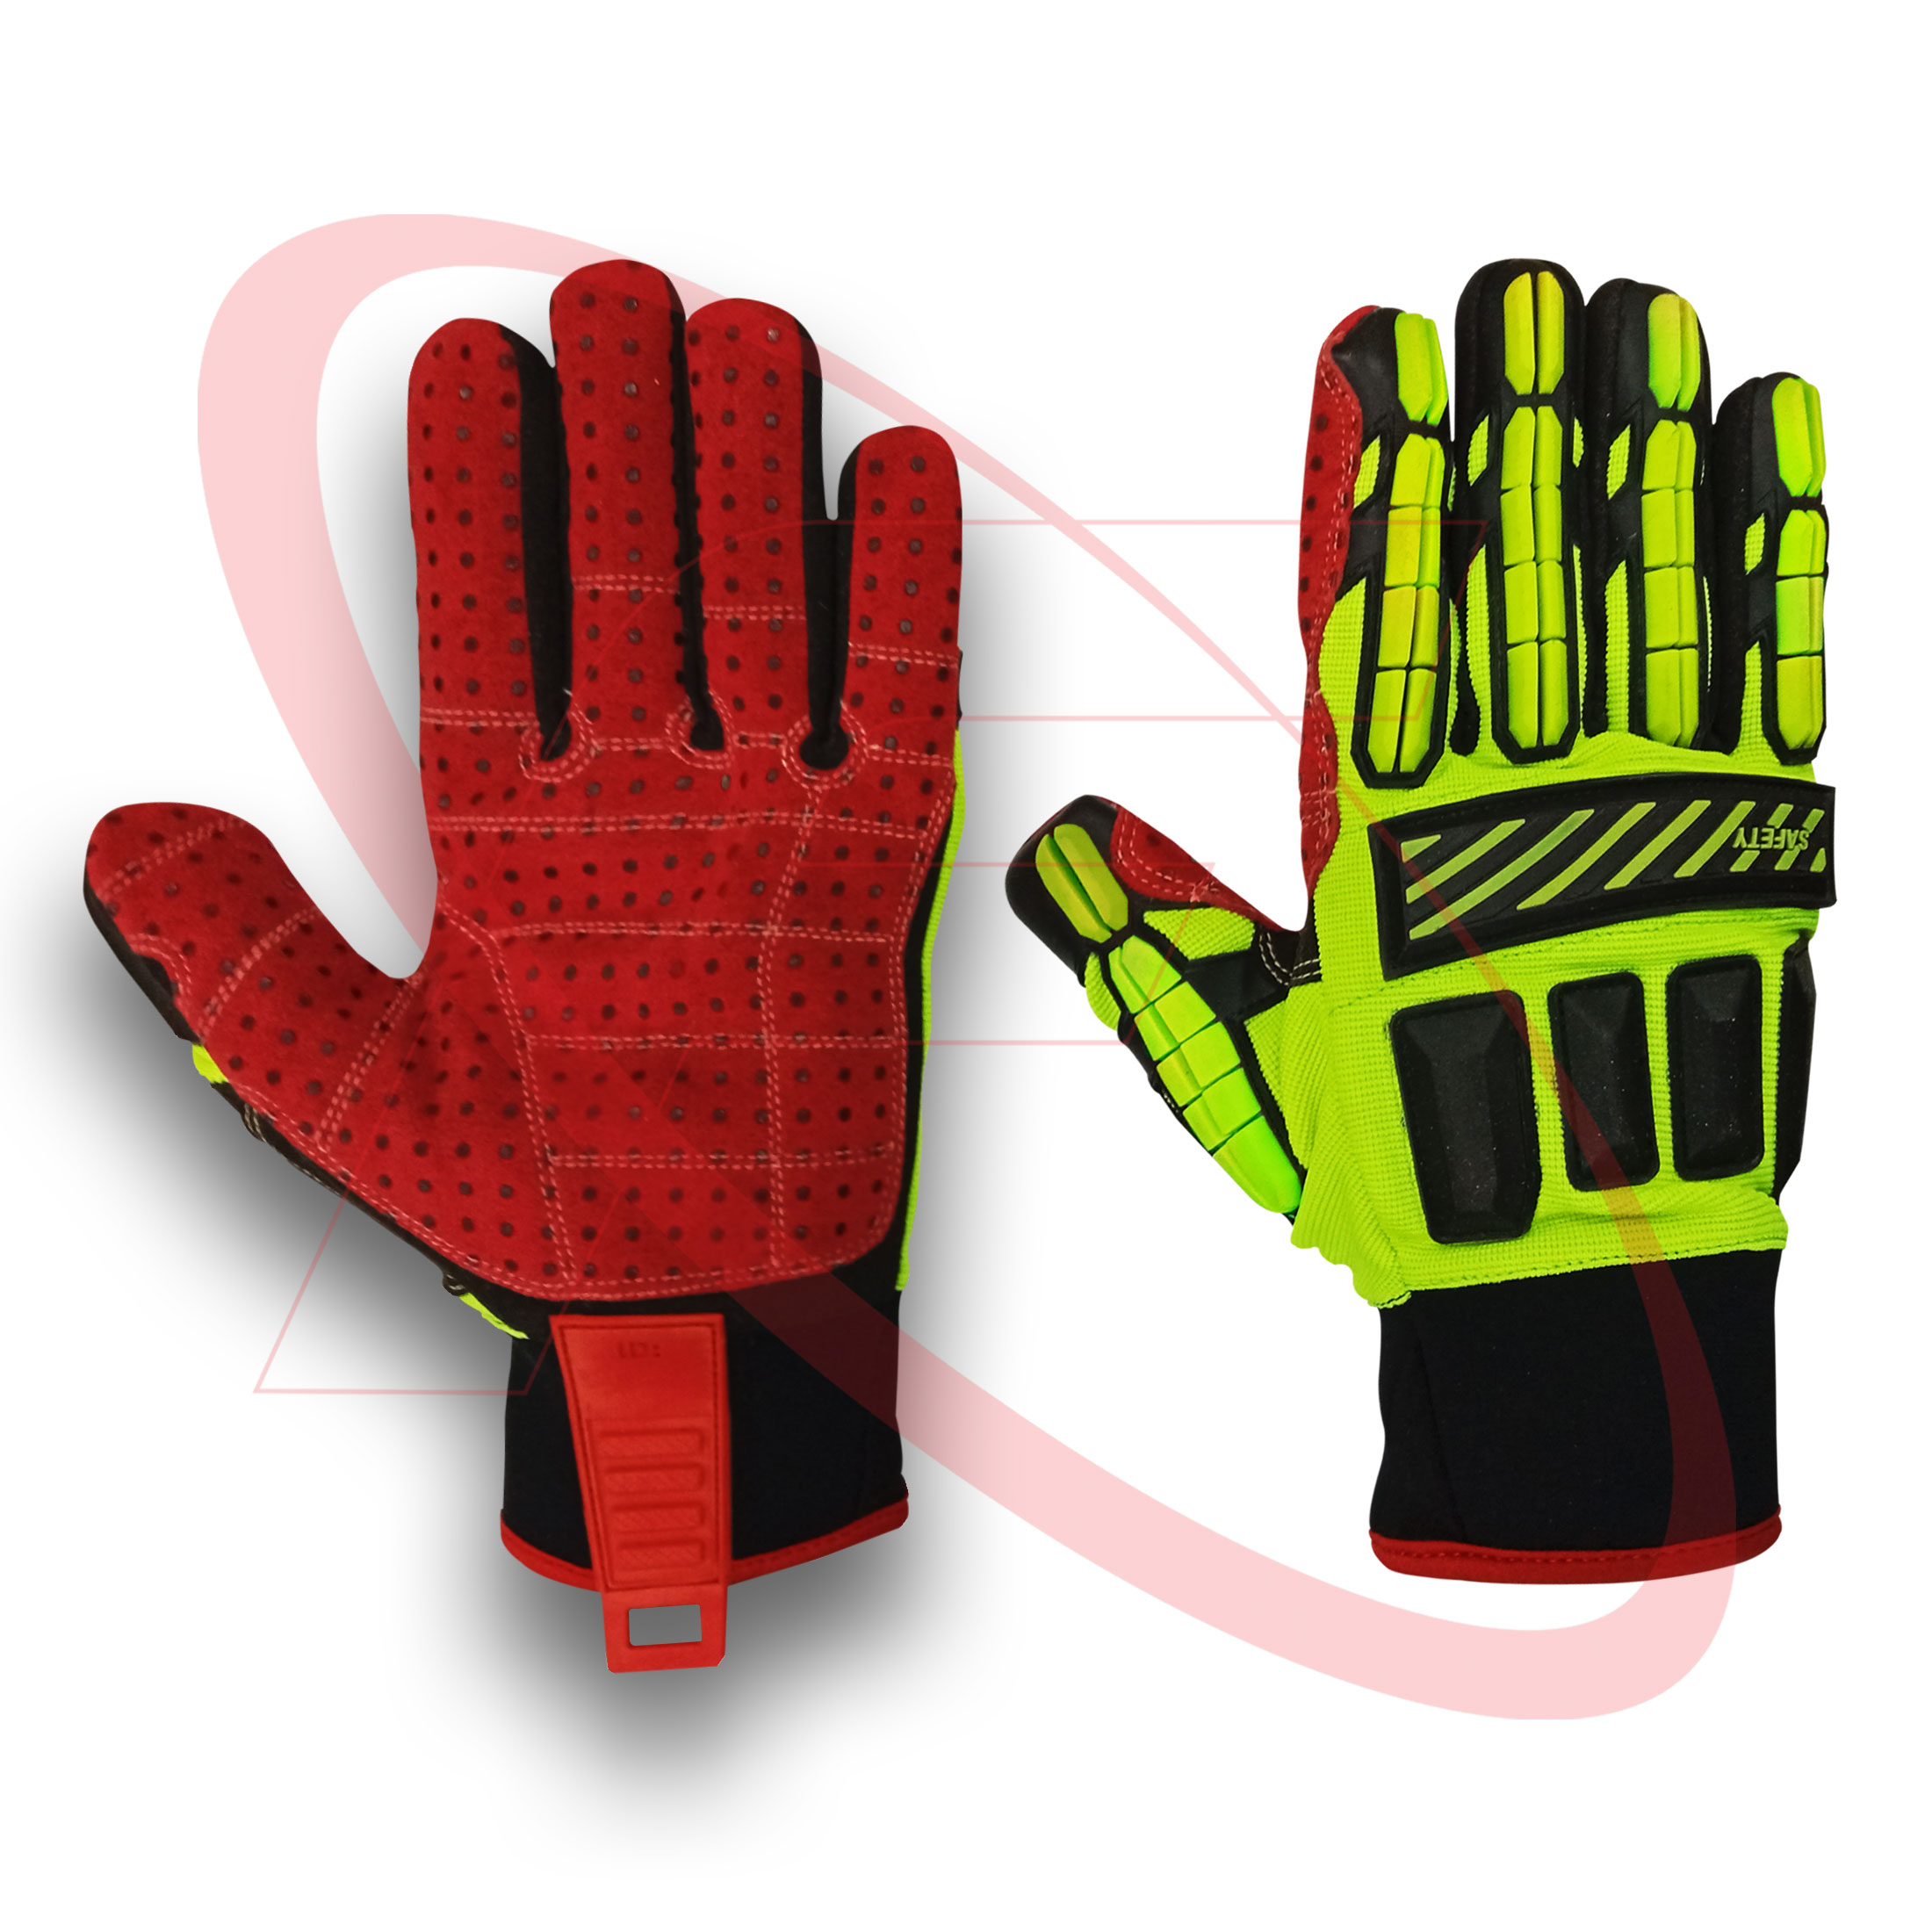 Impact Protected Mechanic Gloves for Industrial Mechanical Work Non-Slip Synthetic Leather Anti Impact Safety Gloves